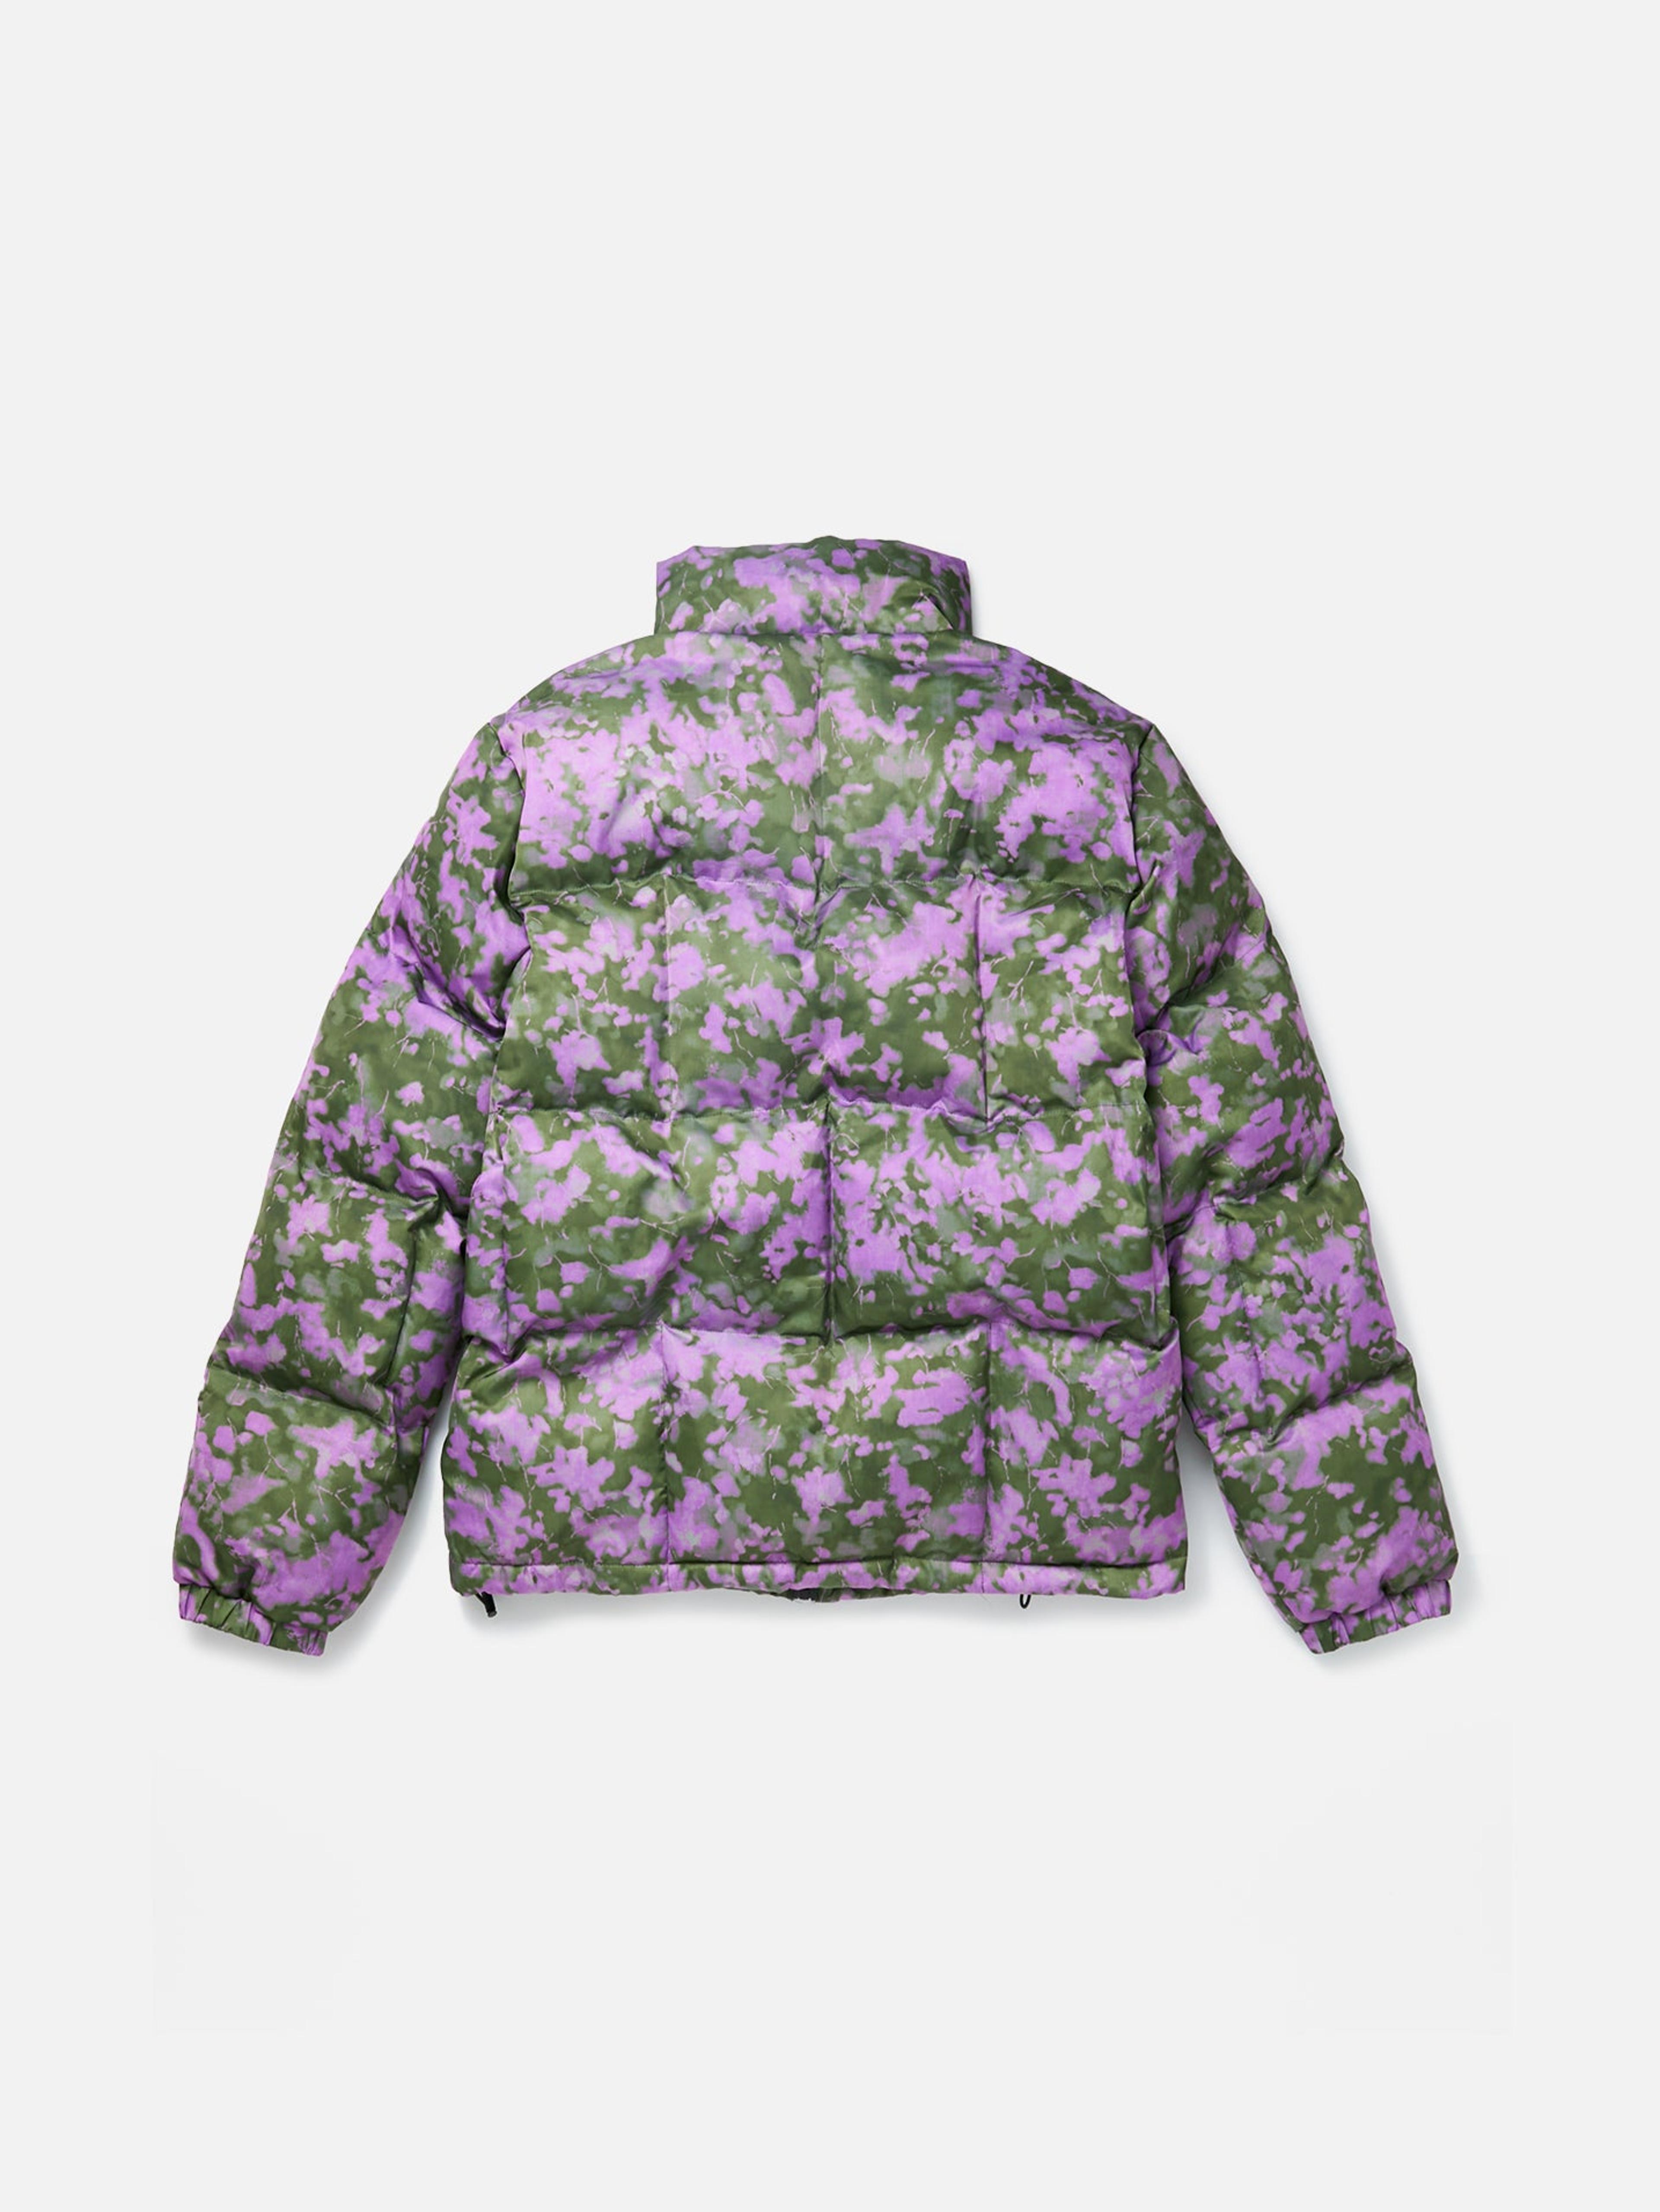 Alternate View 1 of Thermal Camo Puffer - Purple